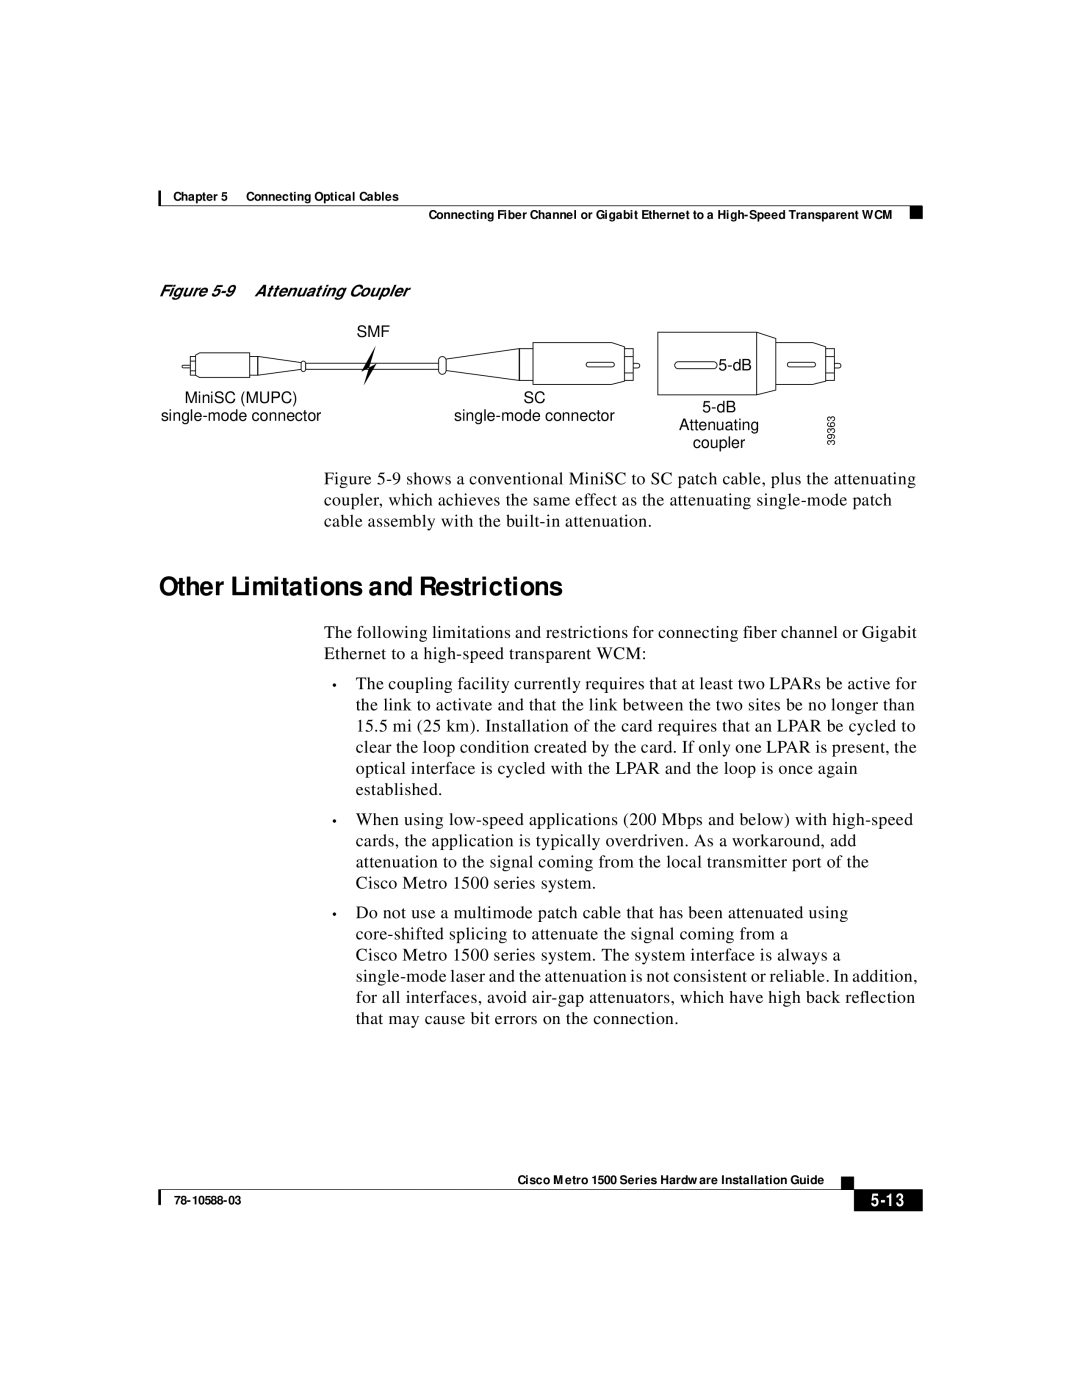 Cisco Systems 1500 manual Other Limitations and Restrictions, 5-13, 9 Attenuating Coupler 